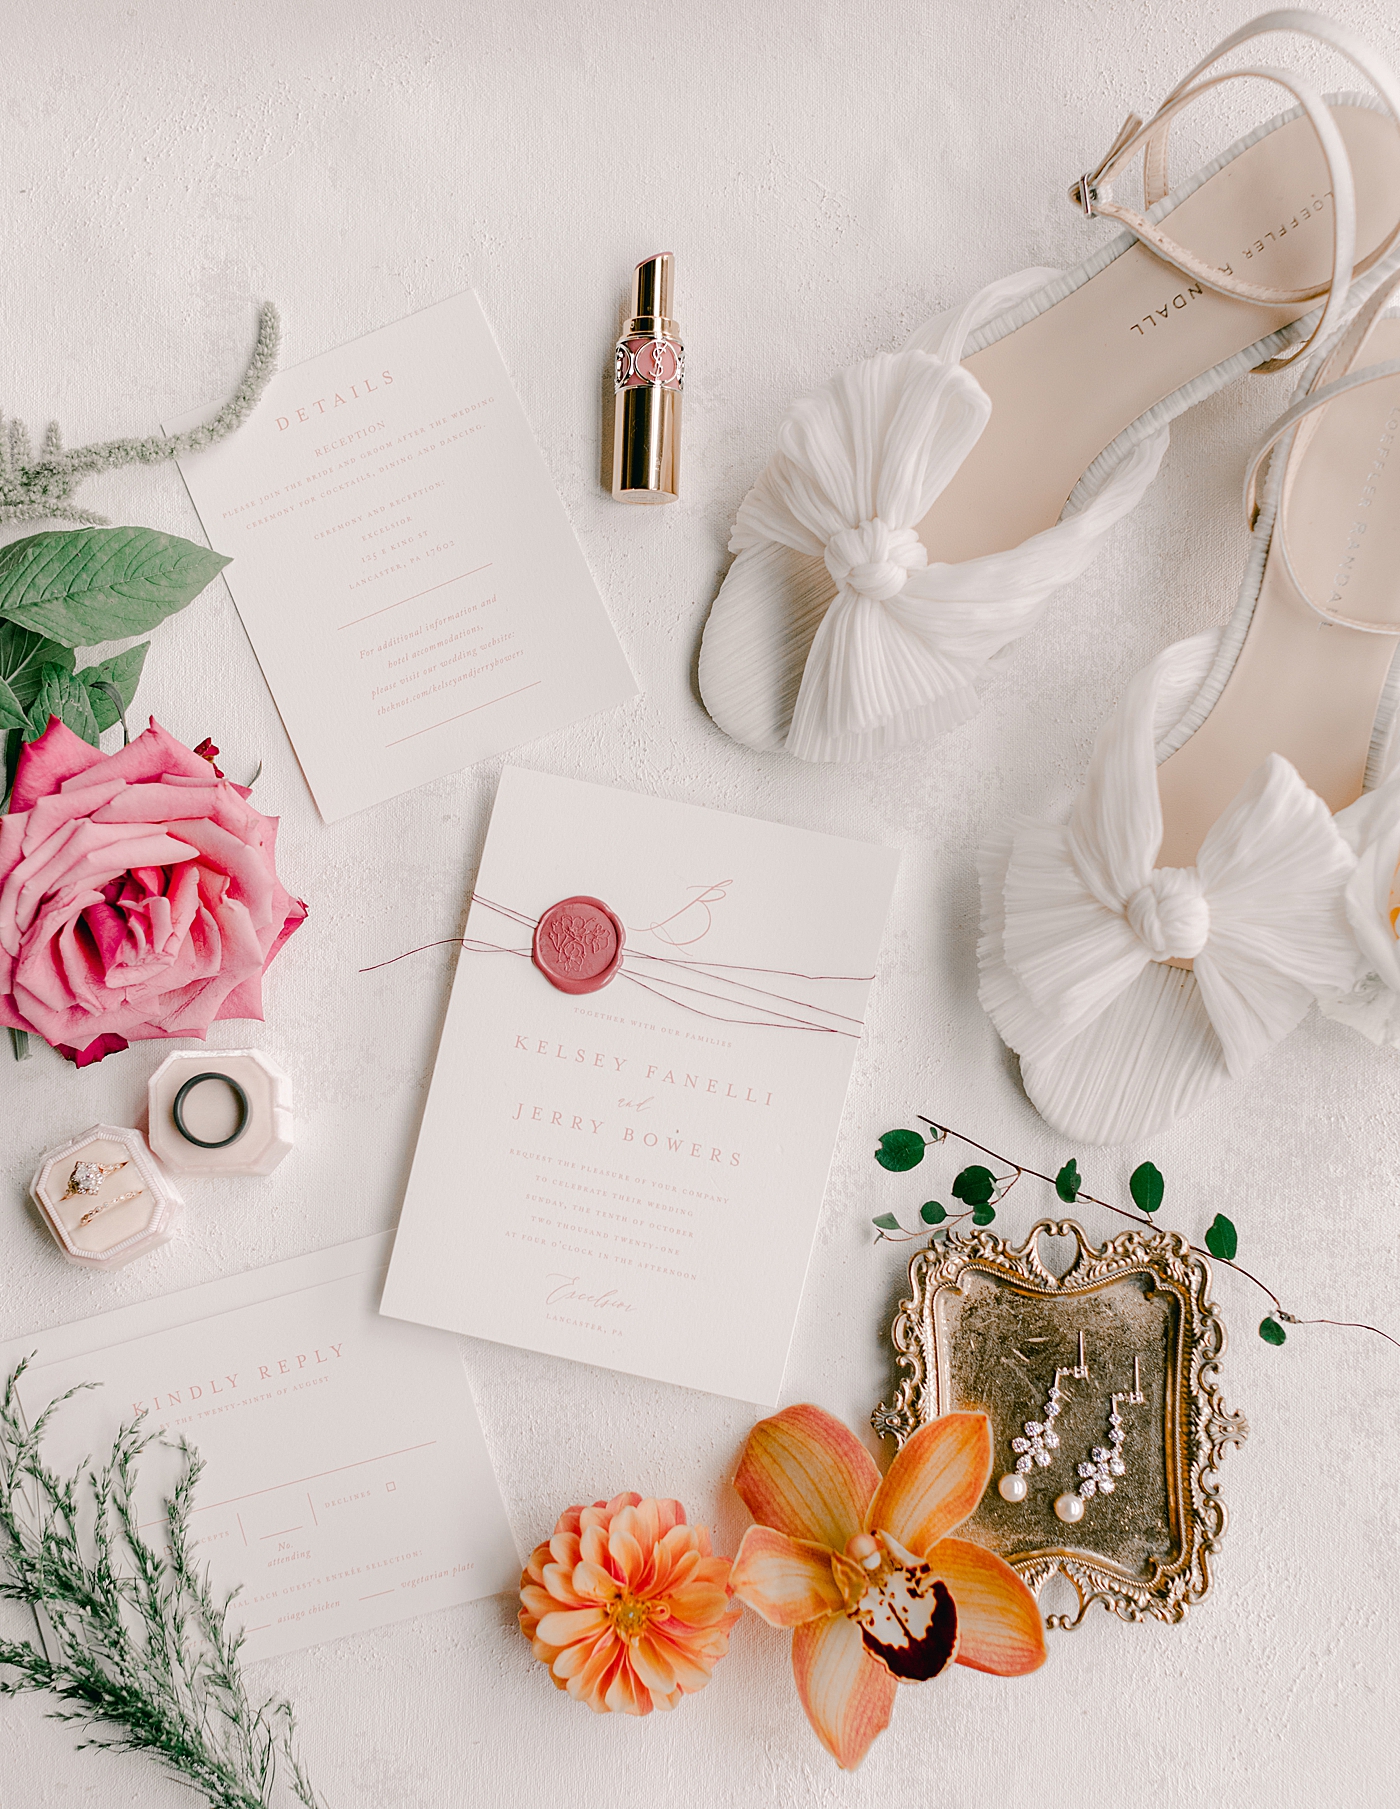 Wedding invitation with shoes, florals and lipstick | Excelsior PA Wedding Photography by Hope Helmuth Photography